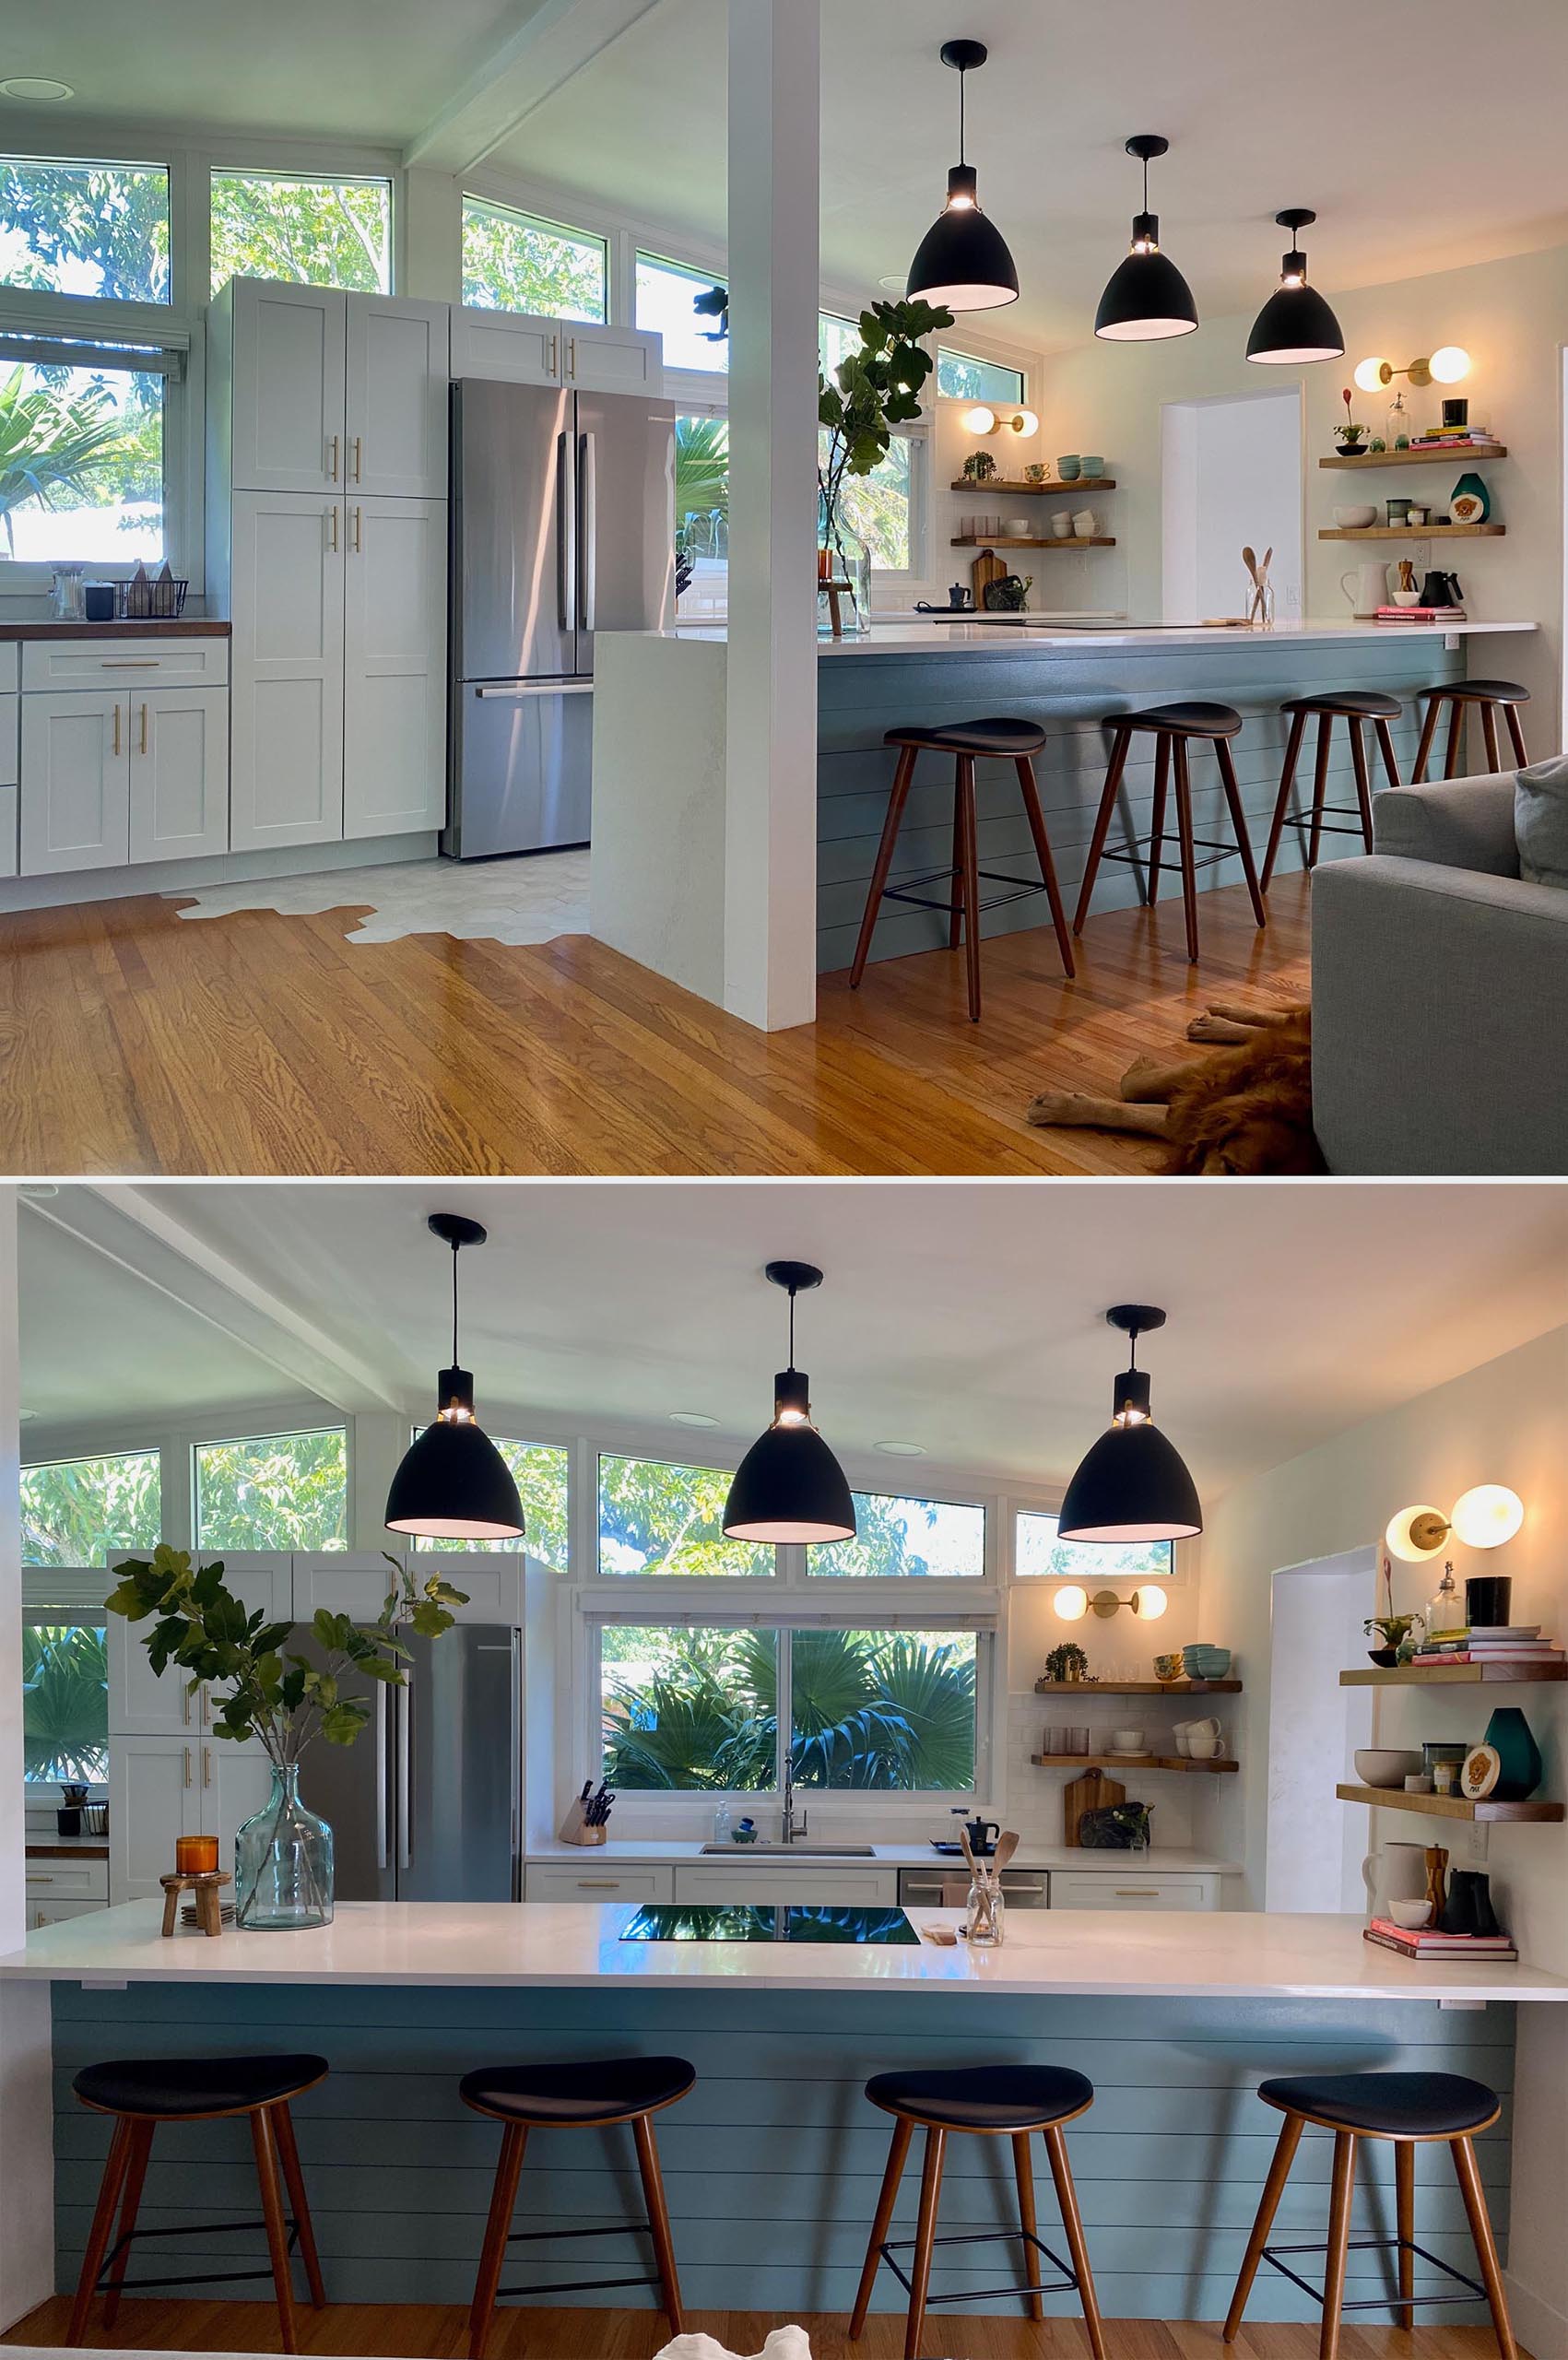 A modern and open kitchen with a peninsula, white cabinets, open wood shelving, and hexagonal floor tiles.